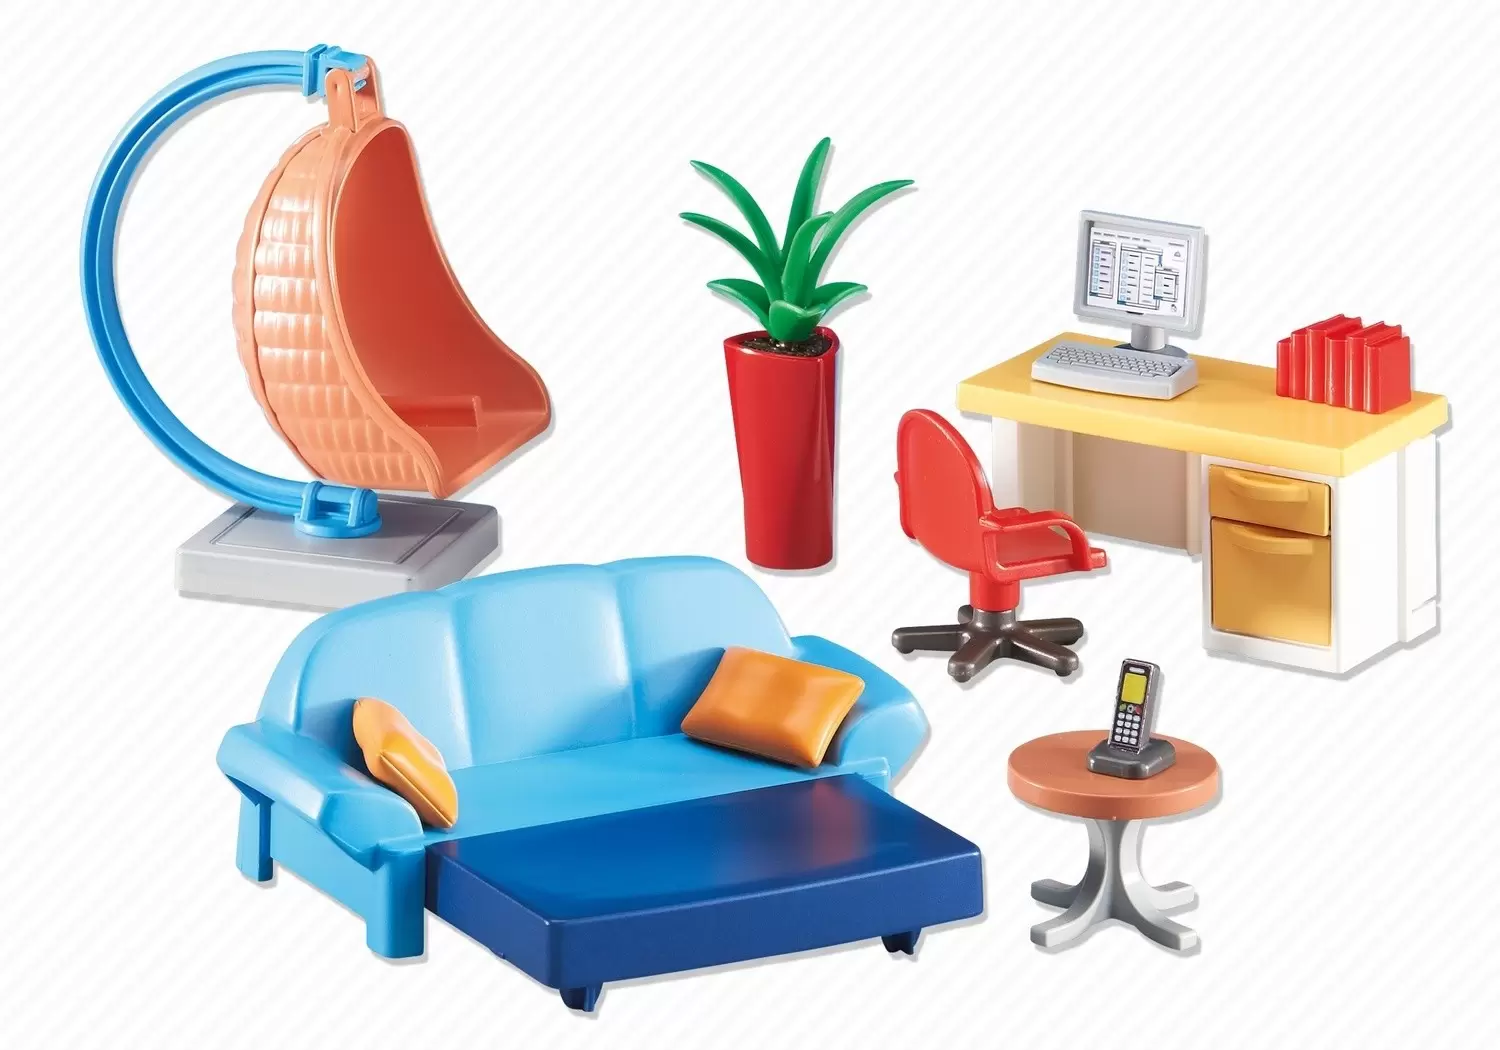 Playmobil Houses and Furniture - Teenager\'s Room